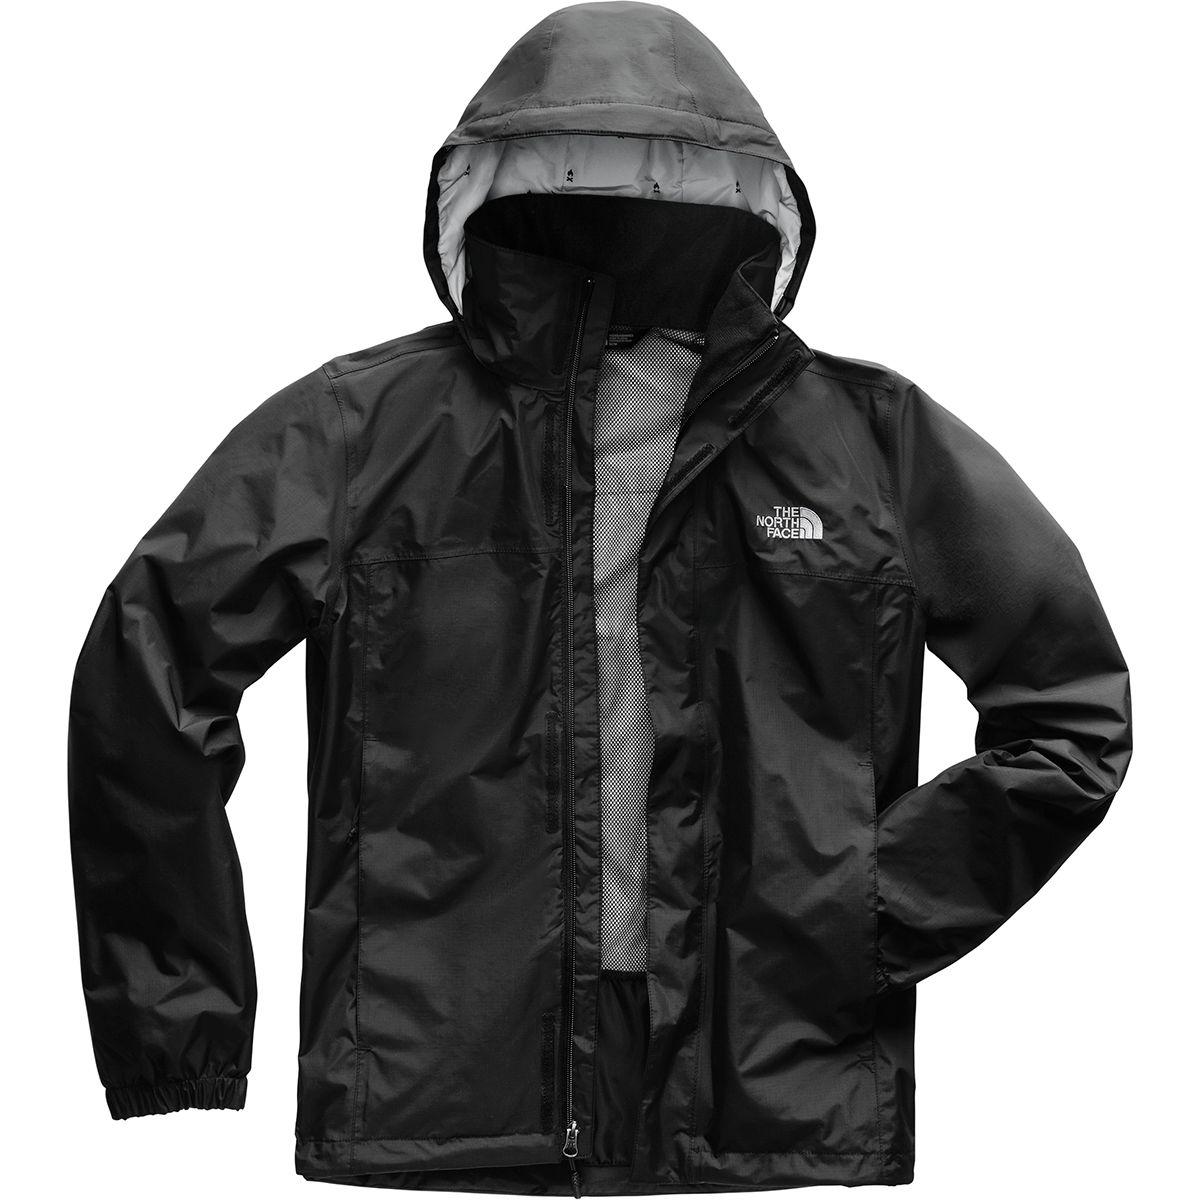 Lyst - The North Face Resolve 2 Hooded Jacket in Black for Men